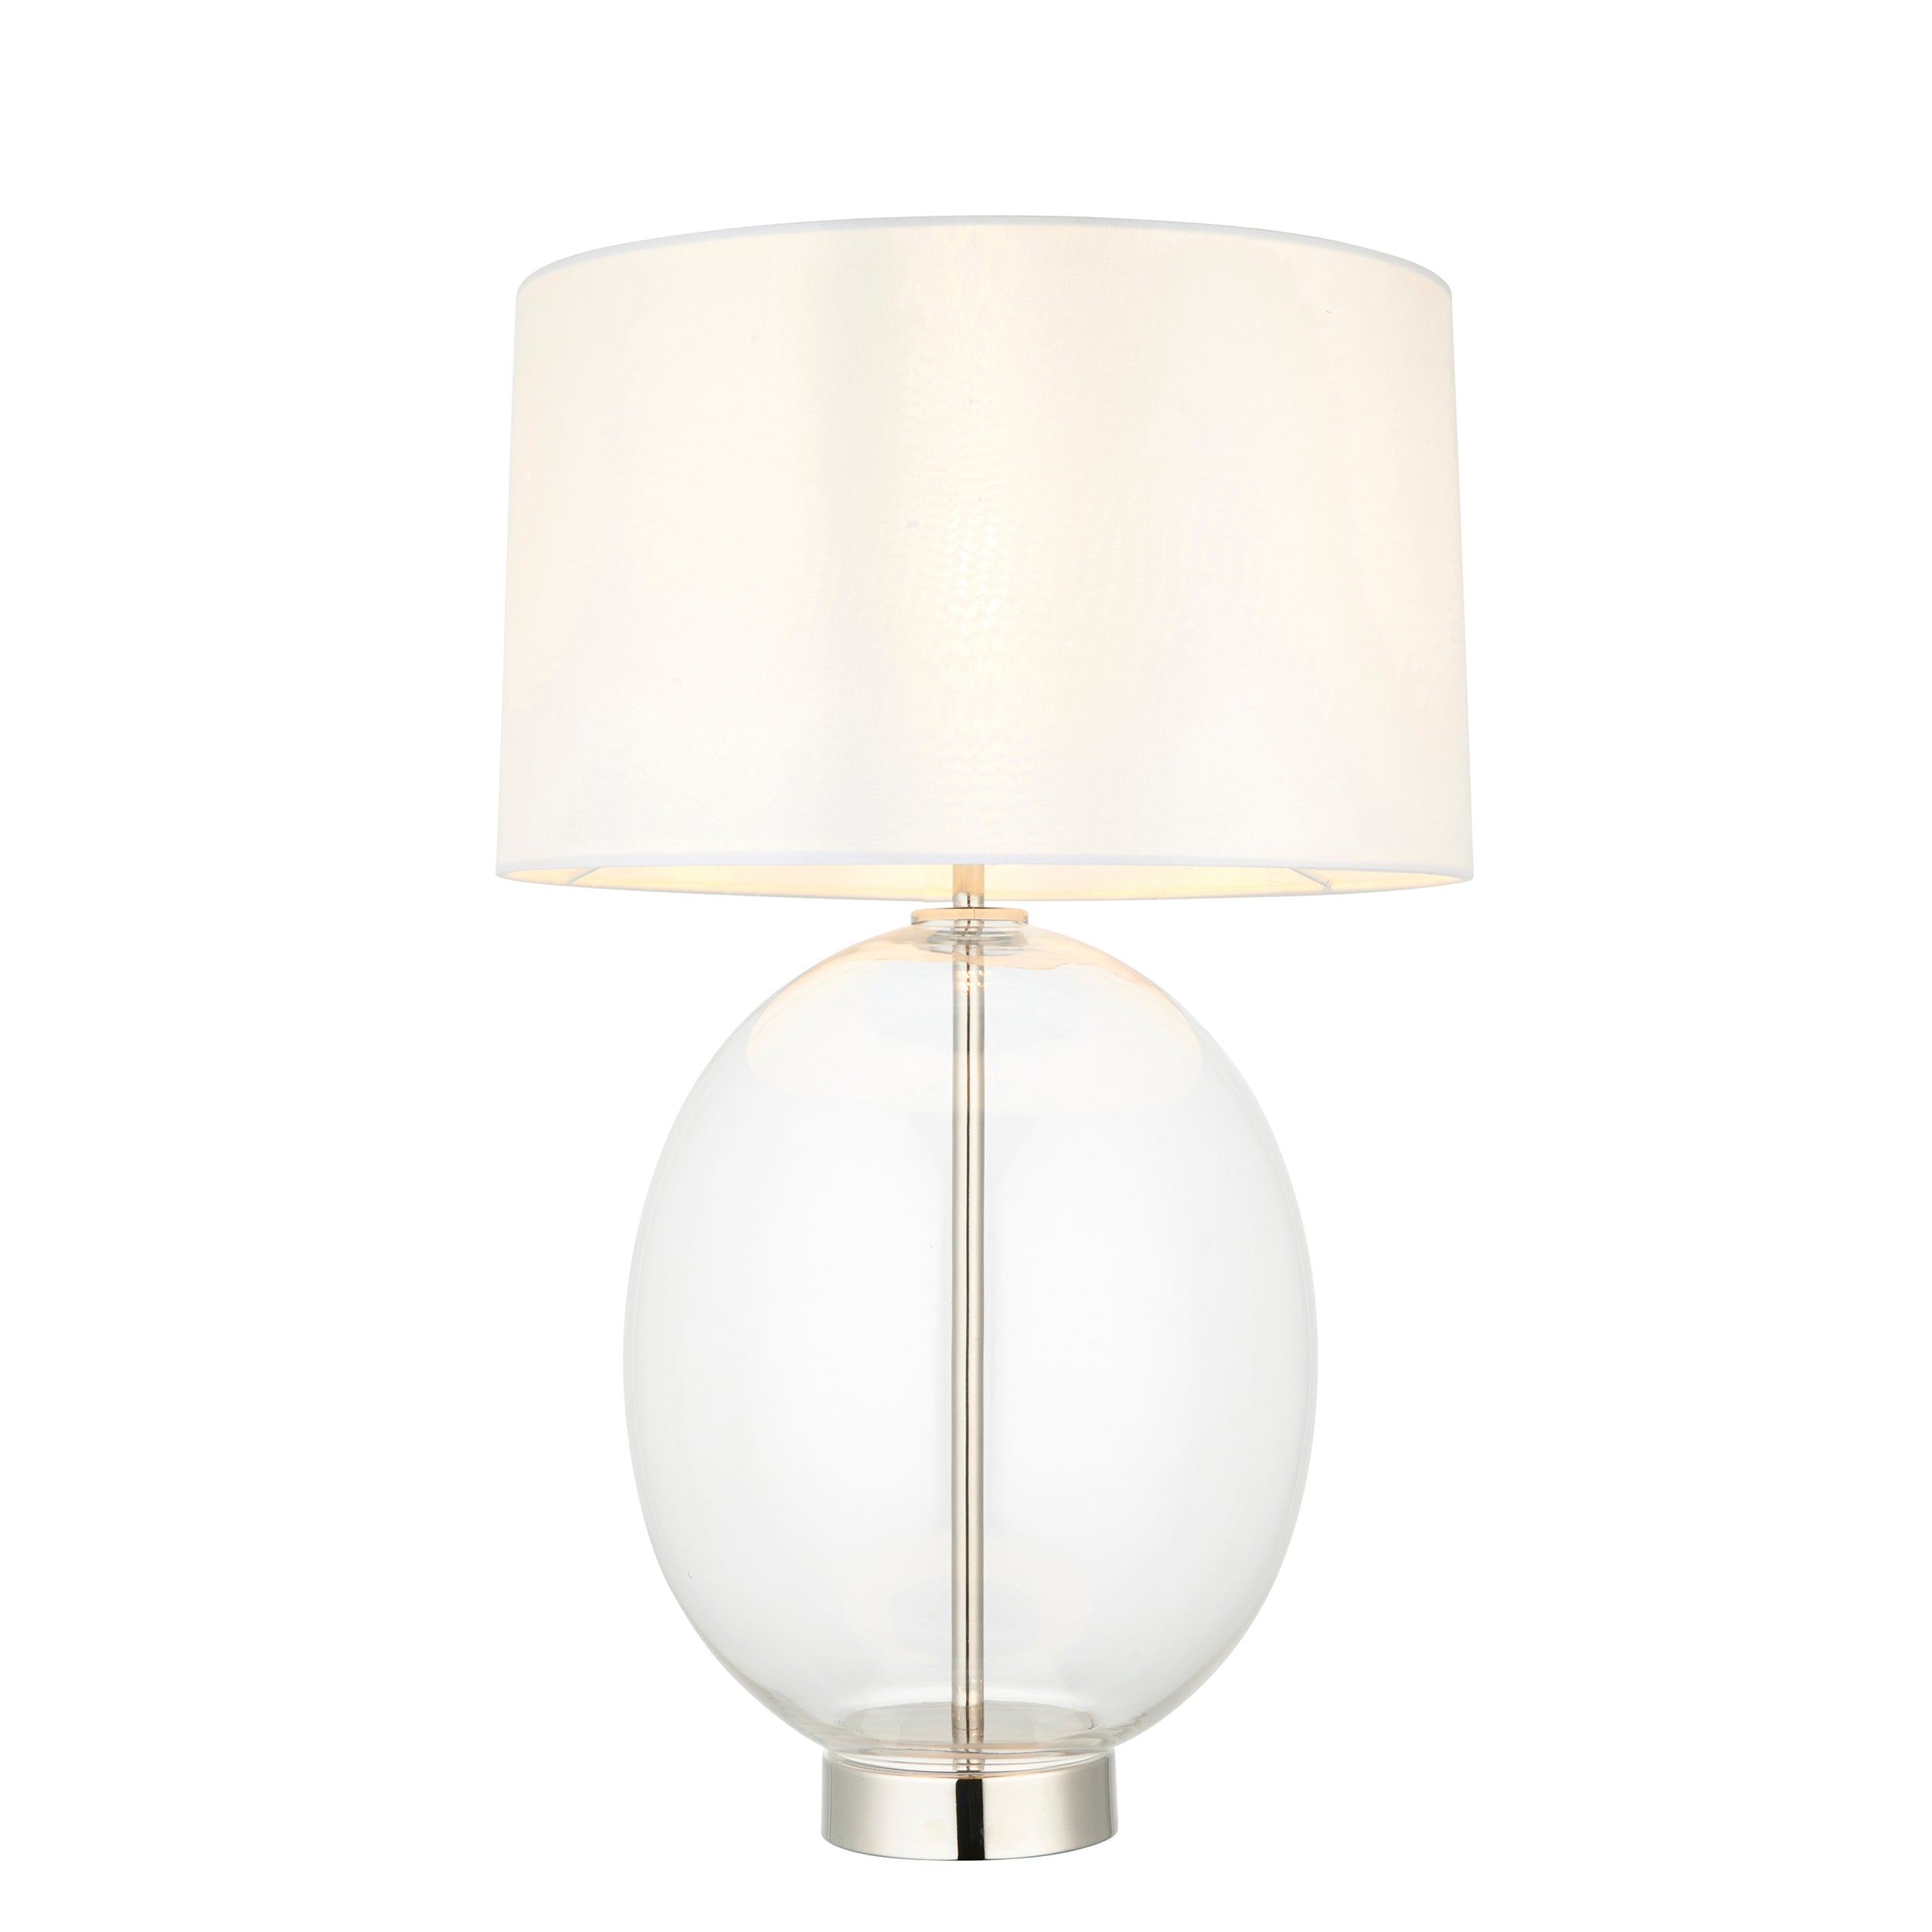 Lightologist Bright nickel plate & clear glass with vintage white fabric Complete Table Light